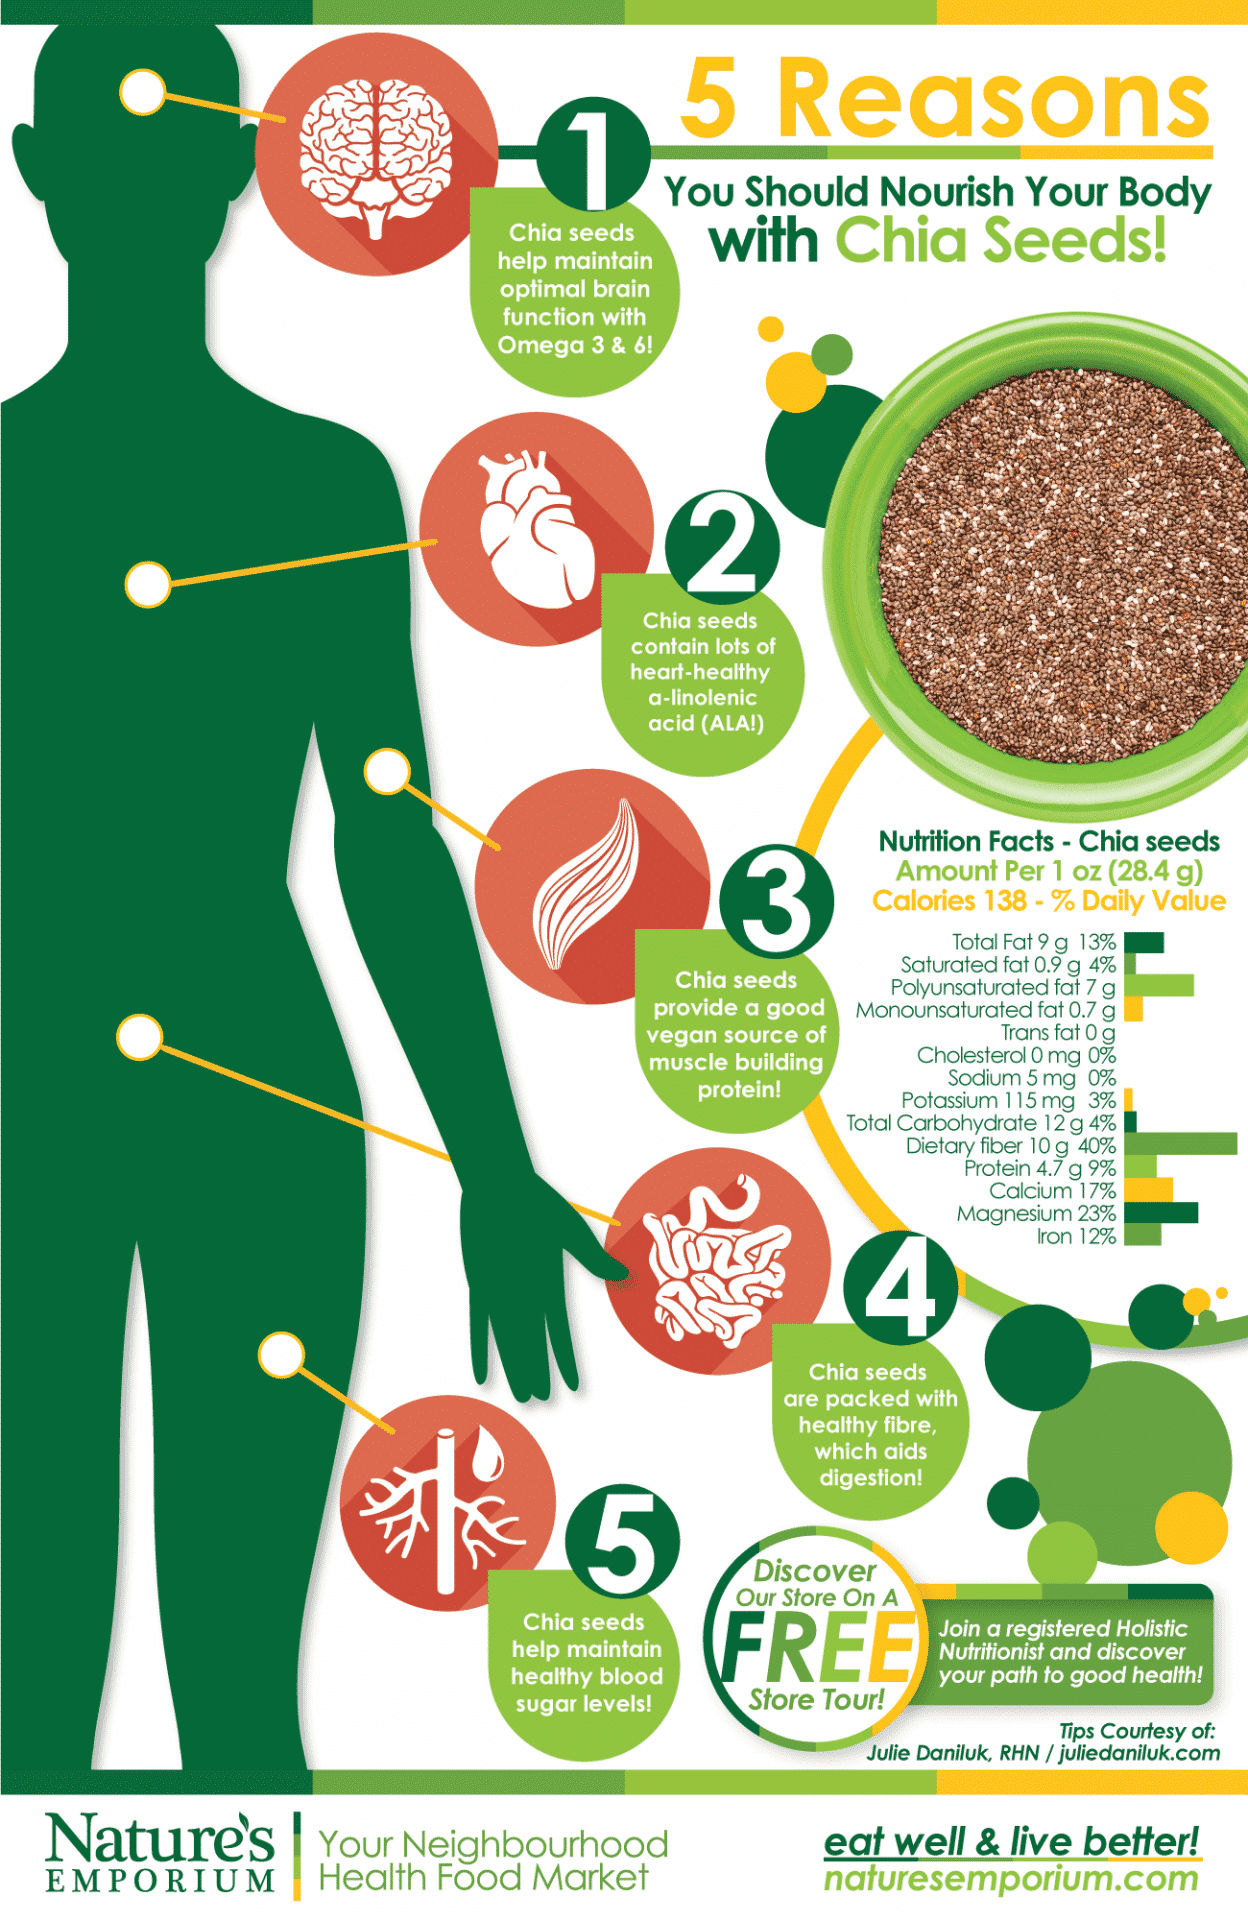 5-Reasons-Why-Chia-Seeds-Are-Good-For-You-Infographic-last-Nature's-Emporium-2014